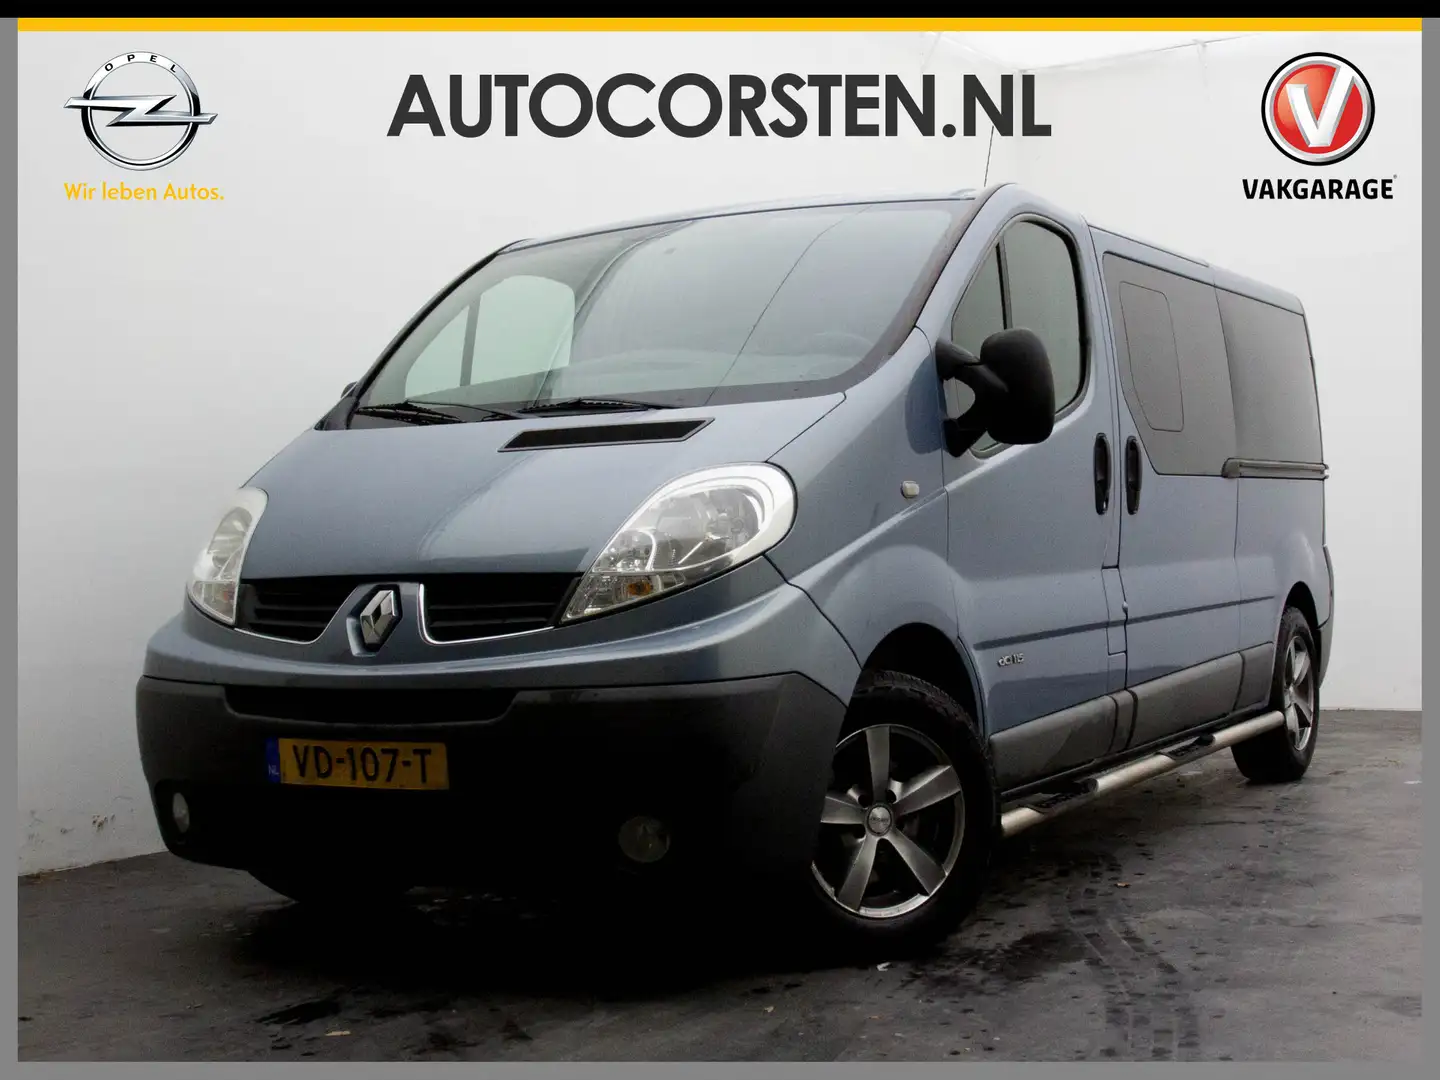 Renault Trafic 2.0D 115pk AUT. L2H1 DC 6pers Navi Trekh. Cruise A siva - 1